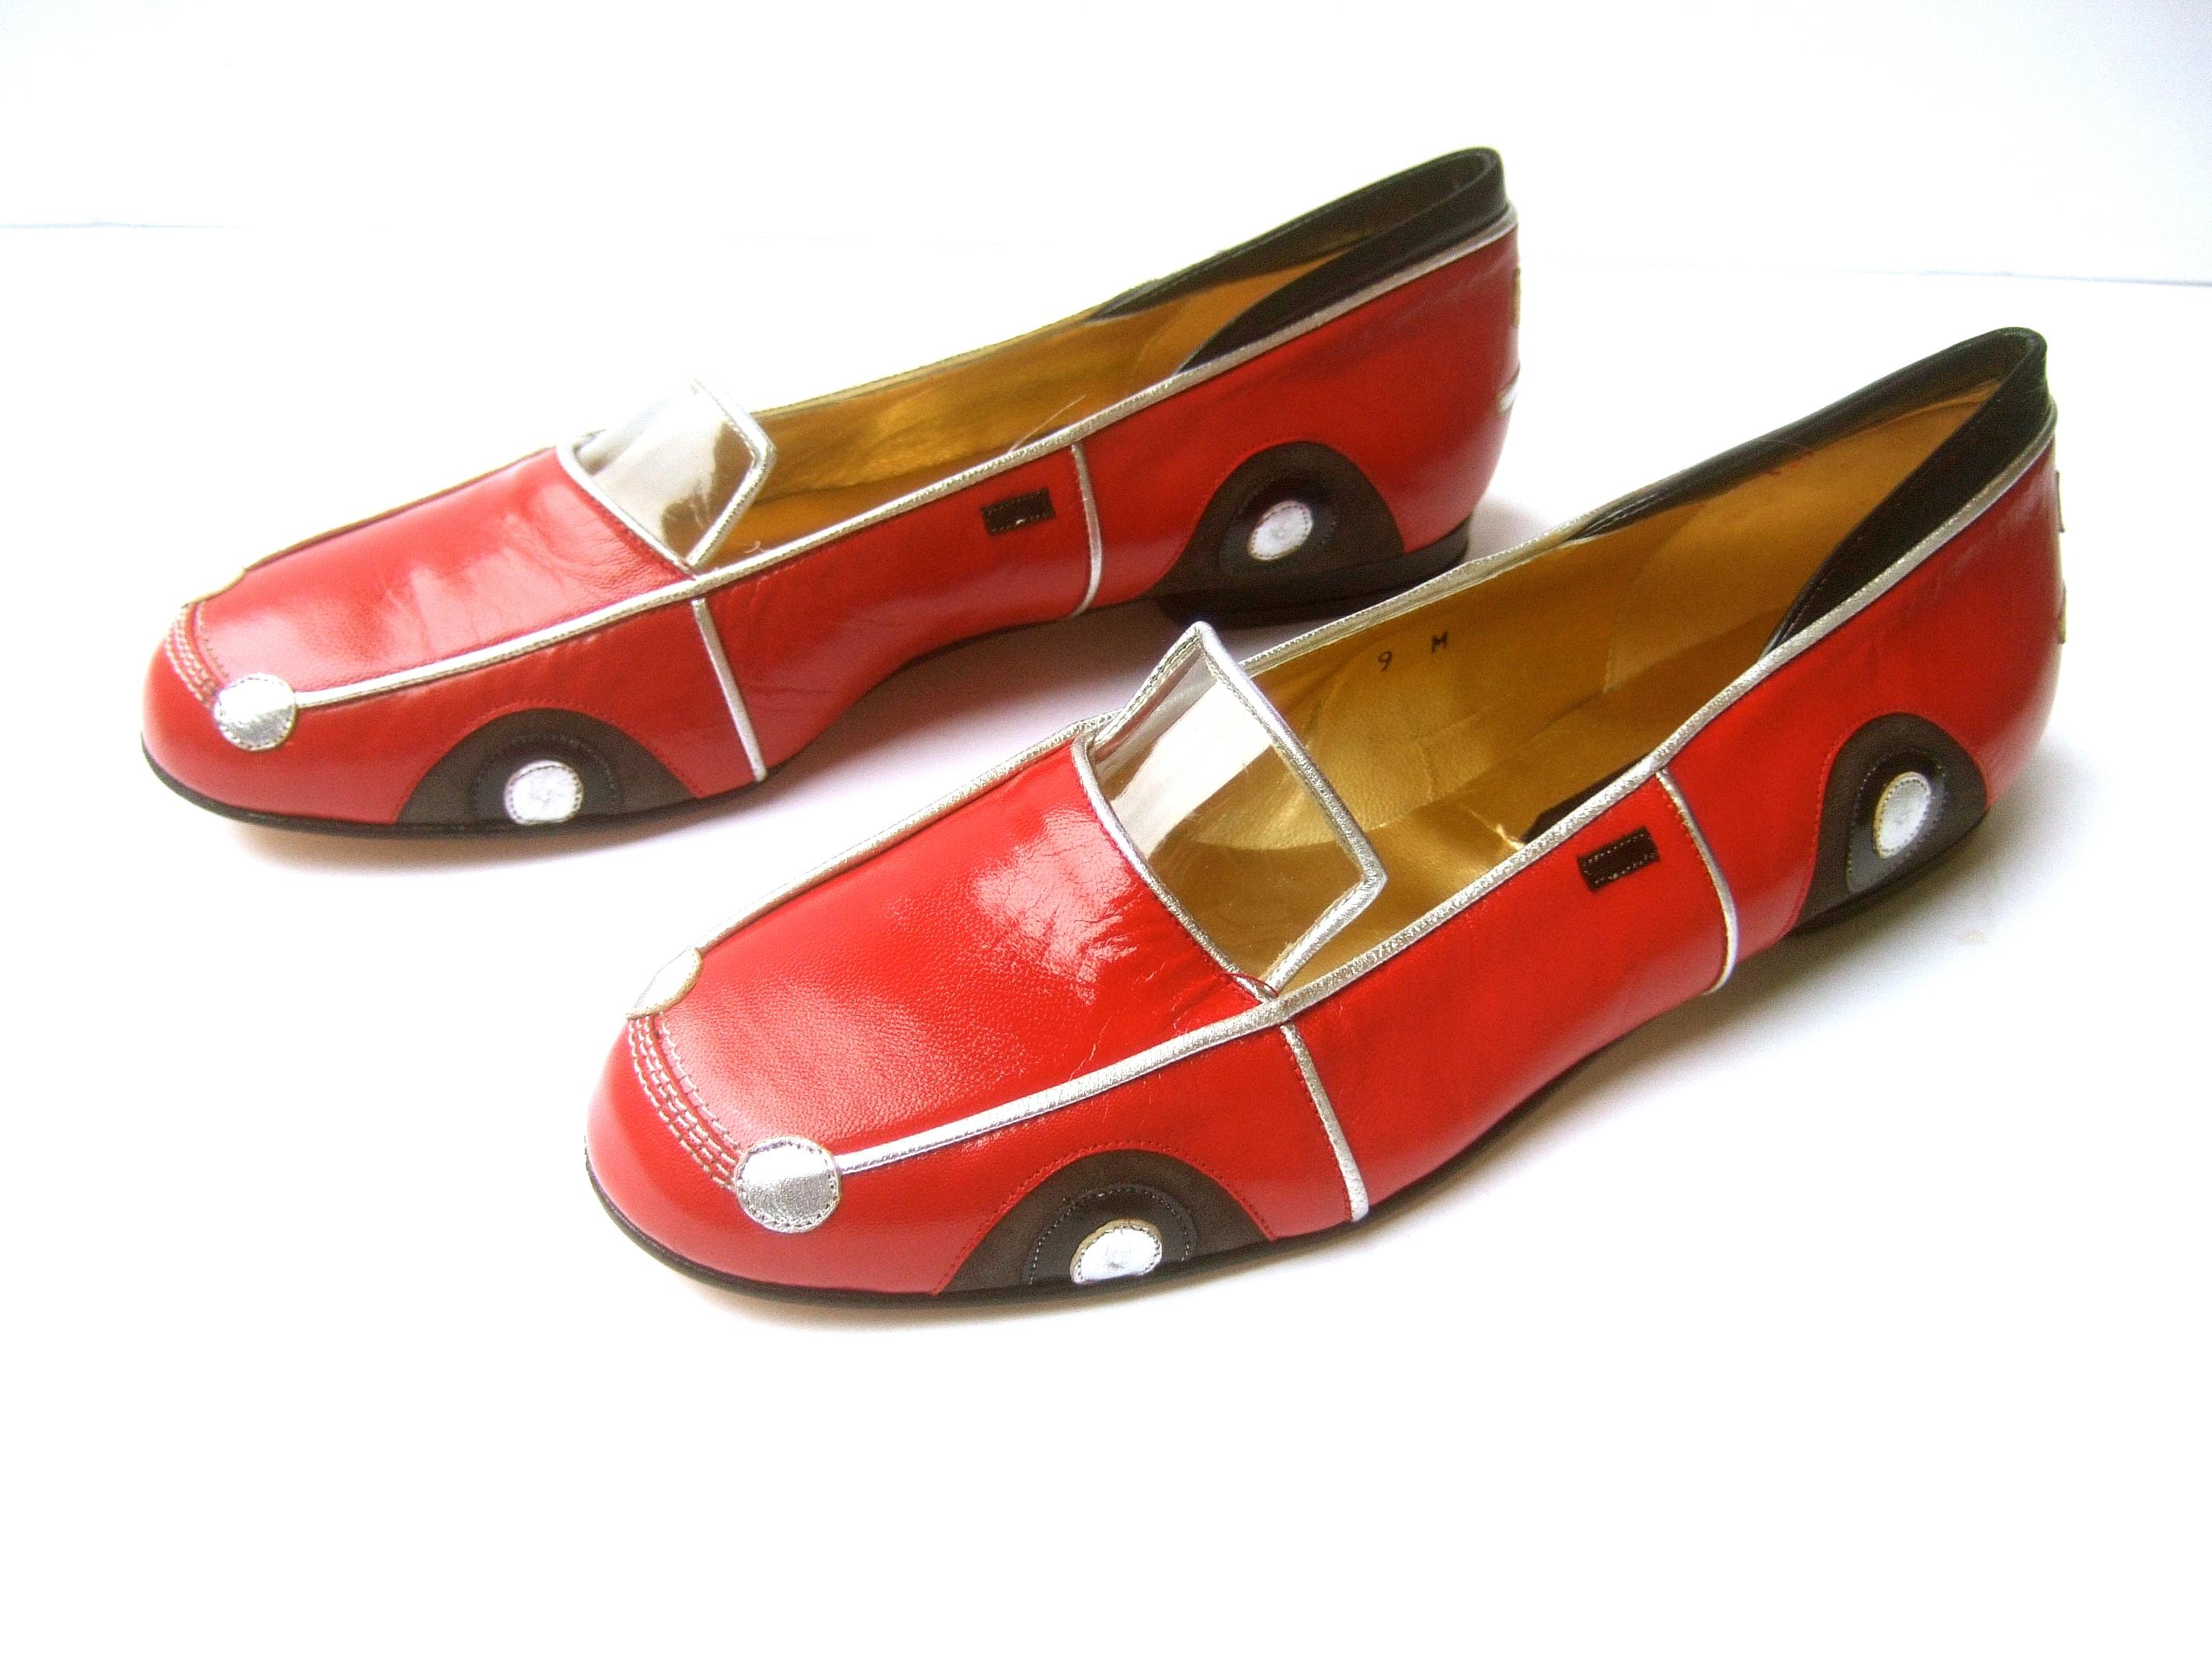 Whimsical Red Leather Sports Car Design Shoes by Zalo US Size 9 M c 1990 7